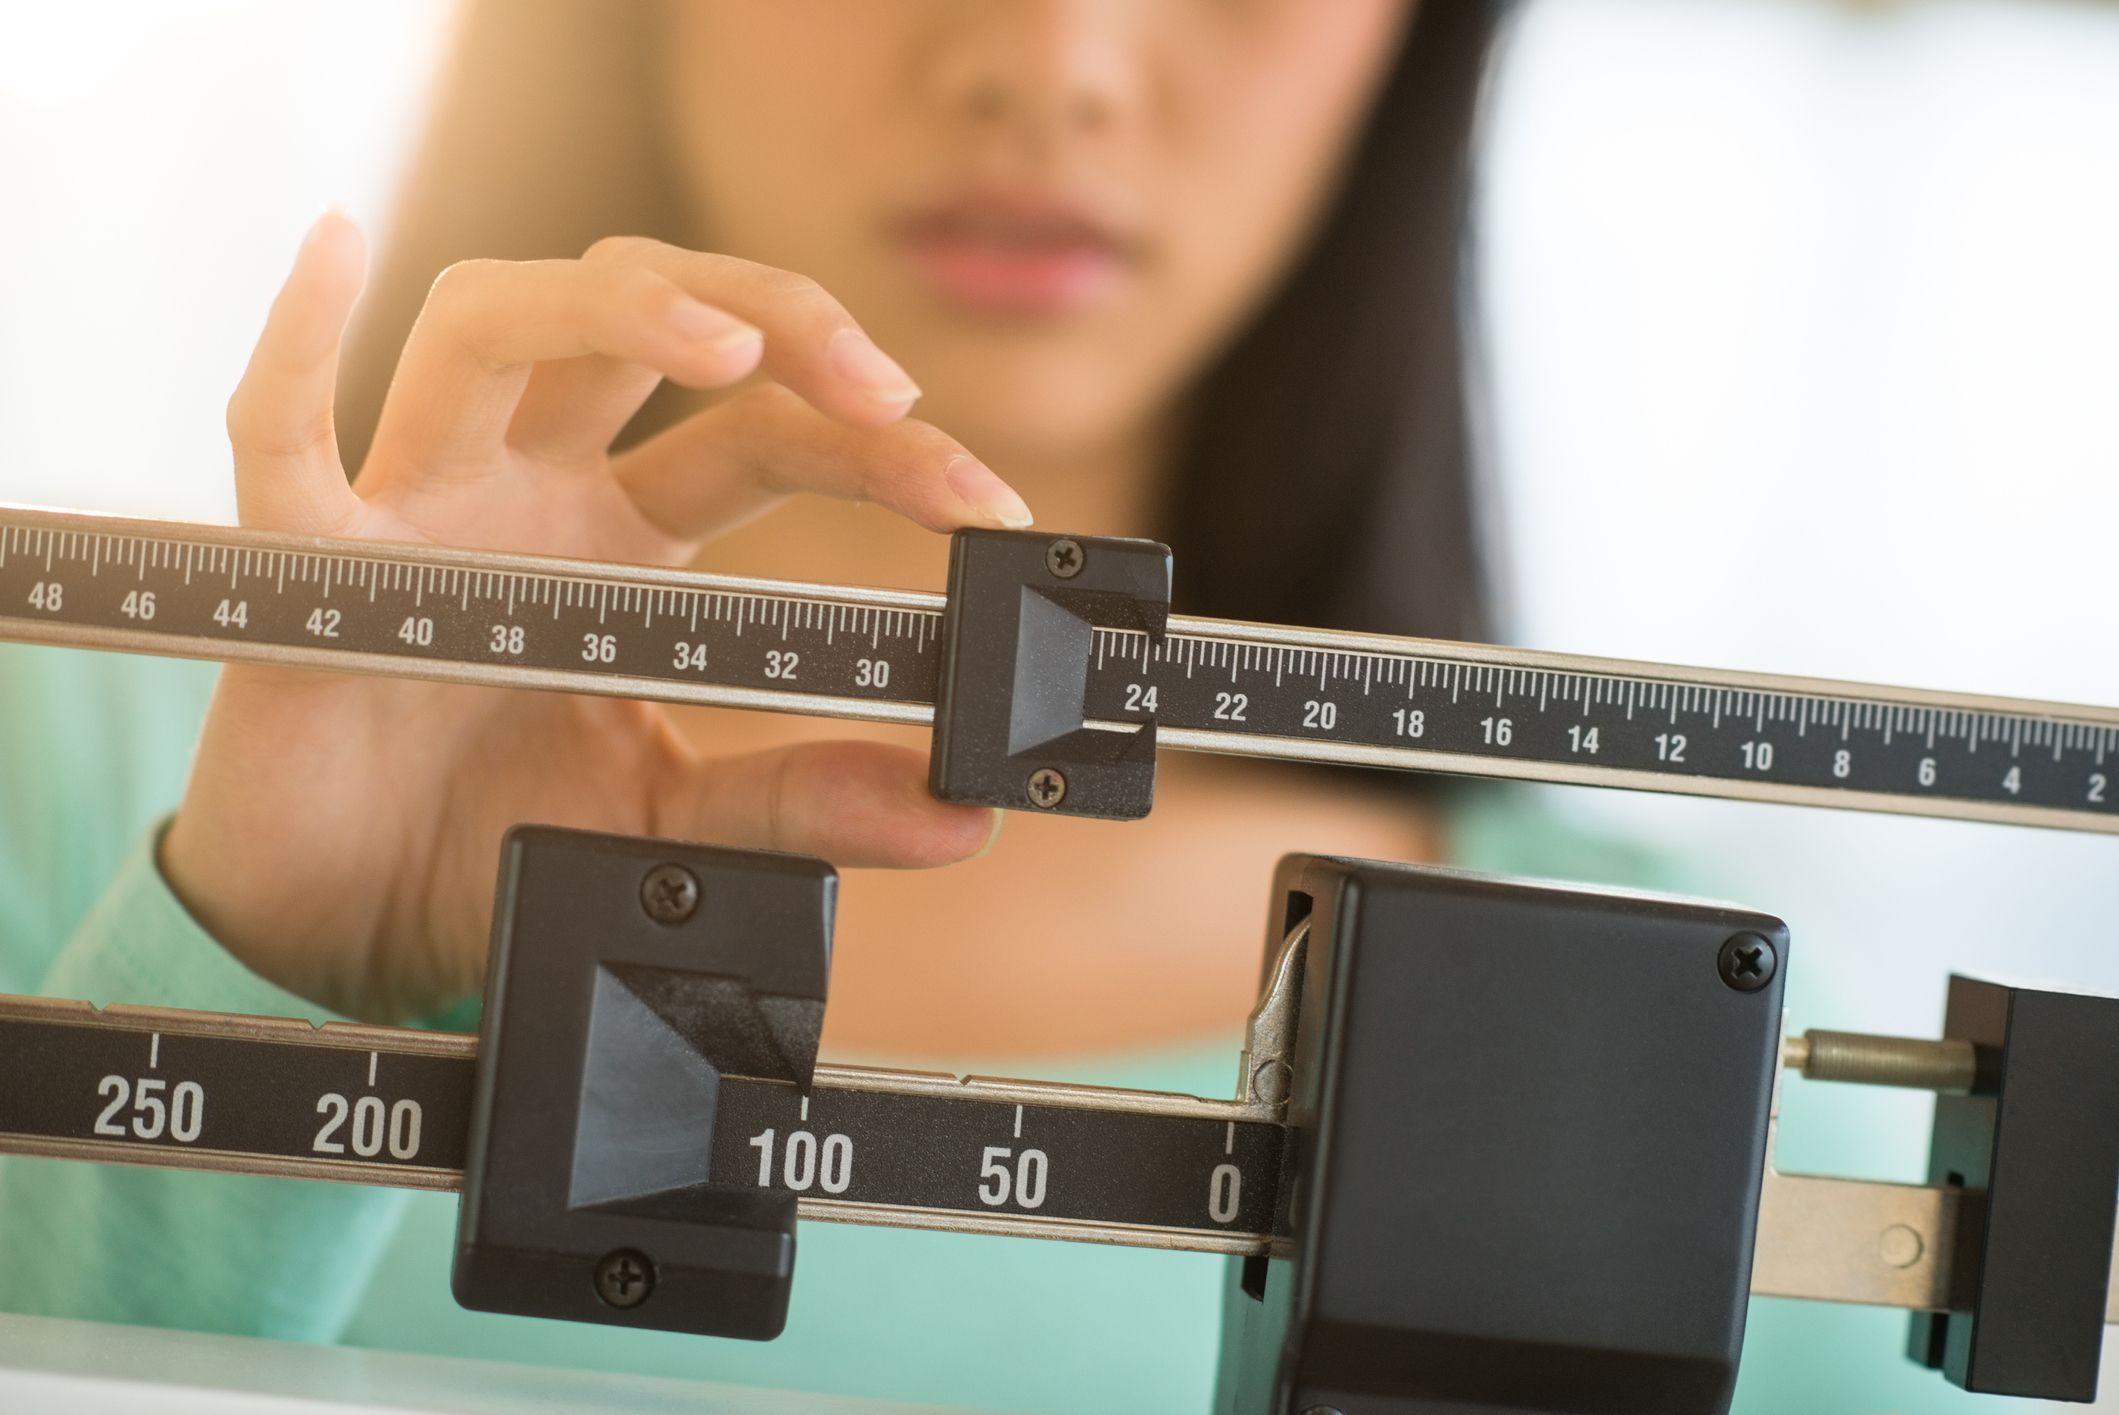 How Much Weight Can You Lose In A Month? Experts Weigh In